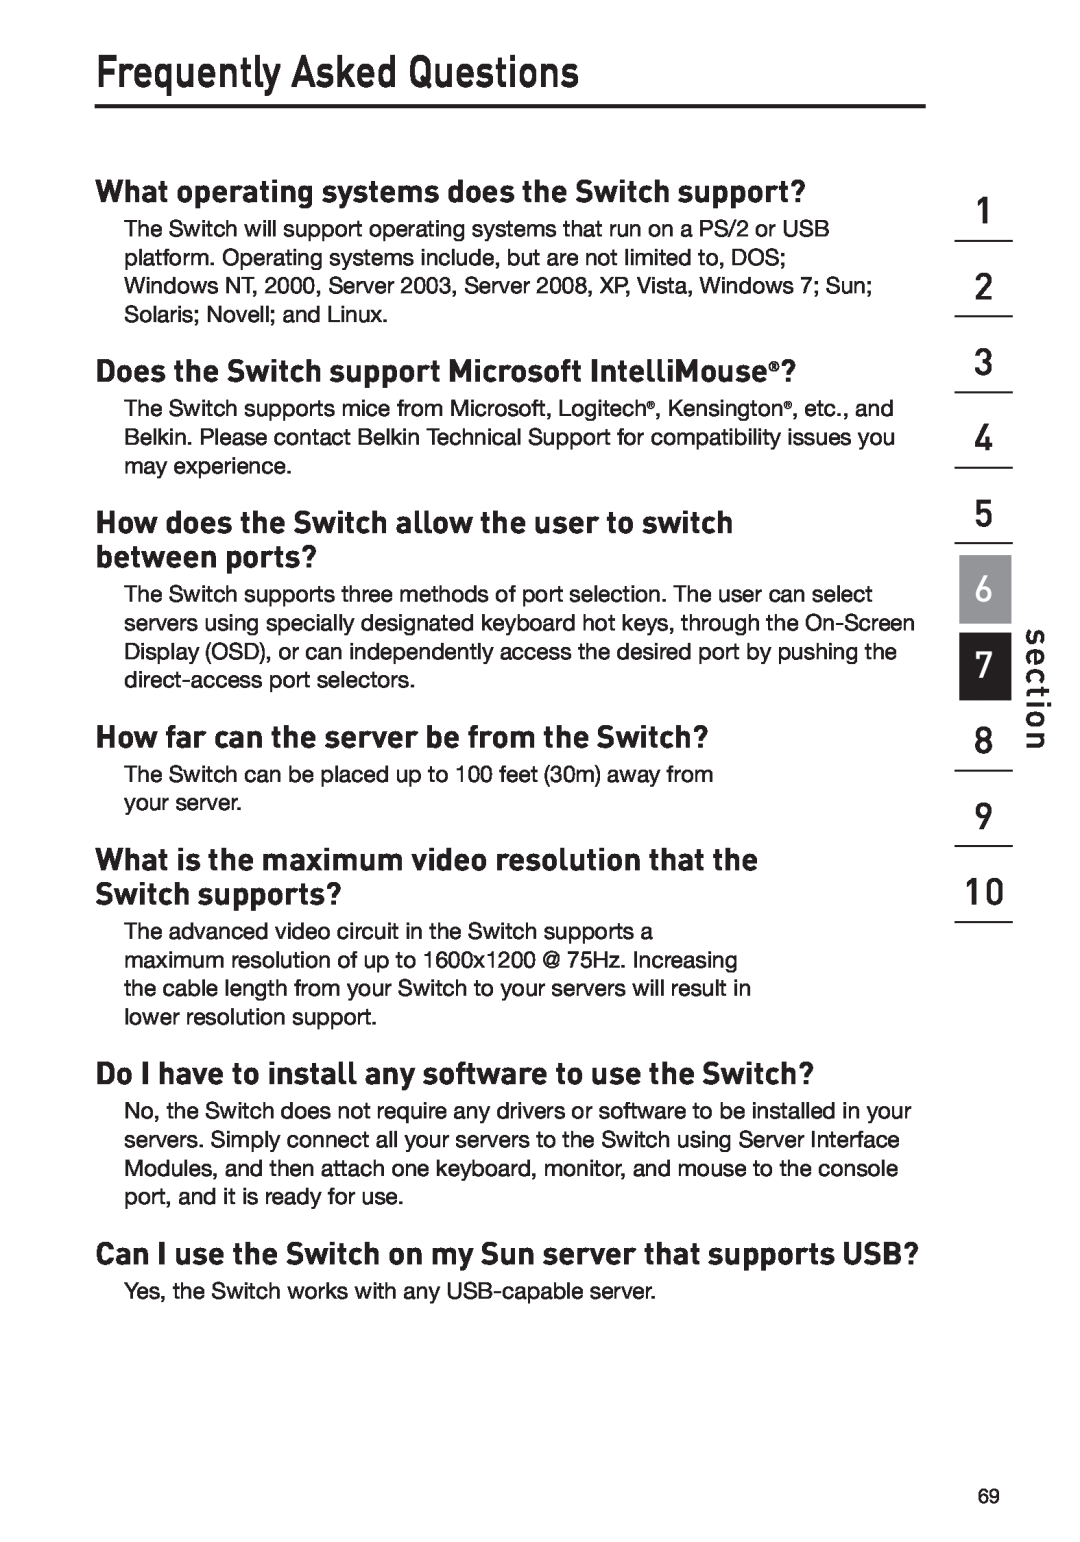 Belkin F1DP108G user manual Frequently Asked Questions, What operating systems does the Switch support?, section 